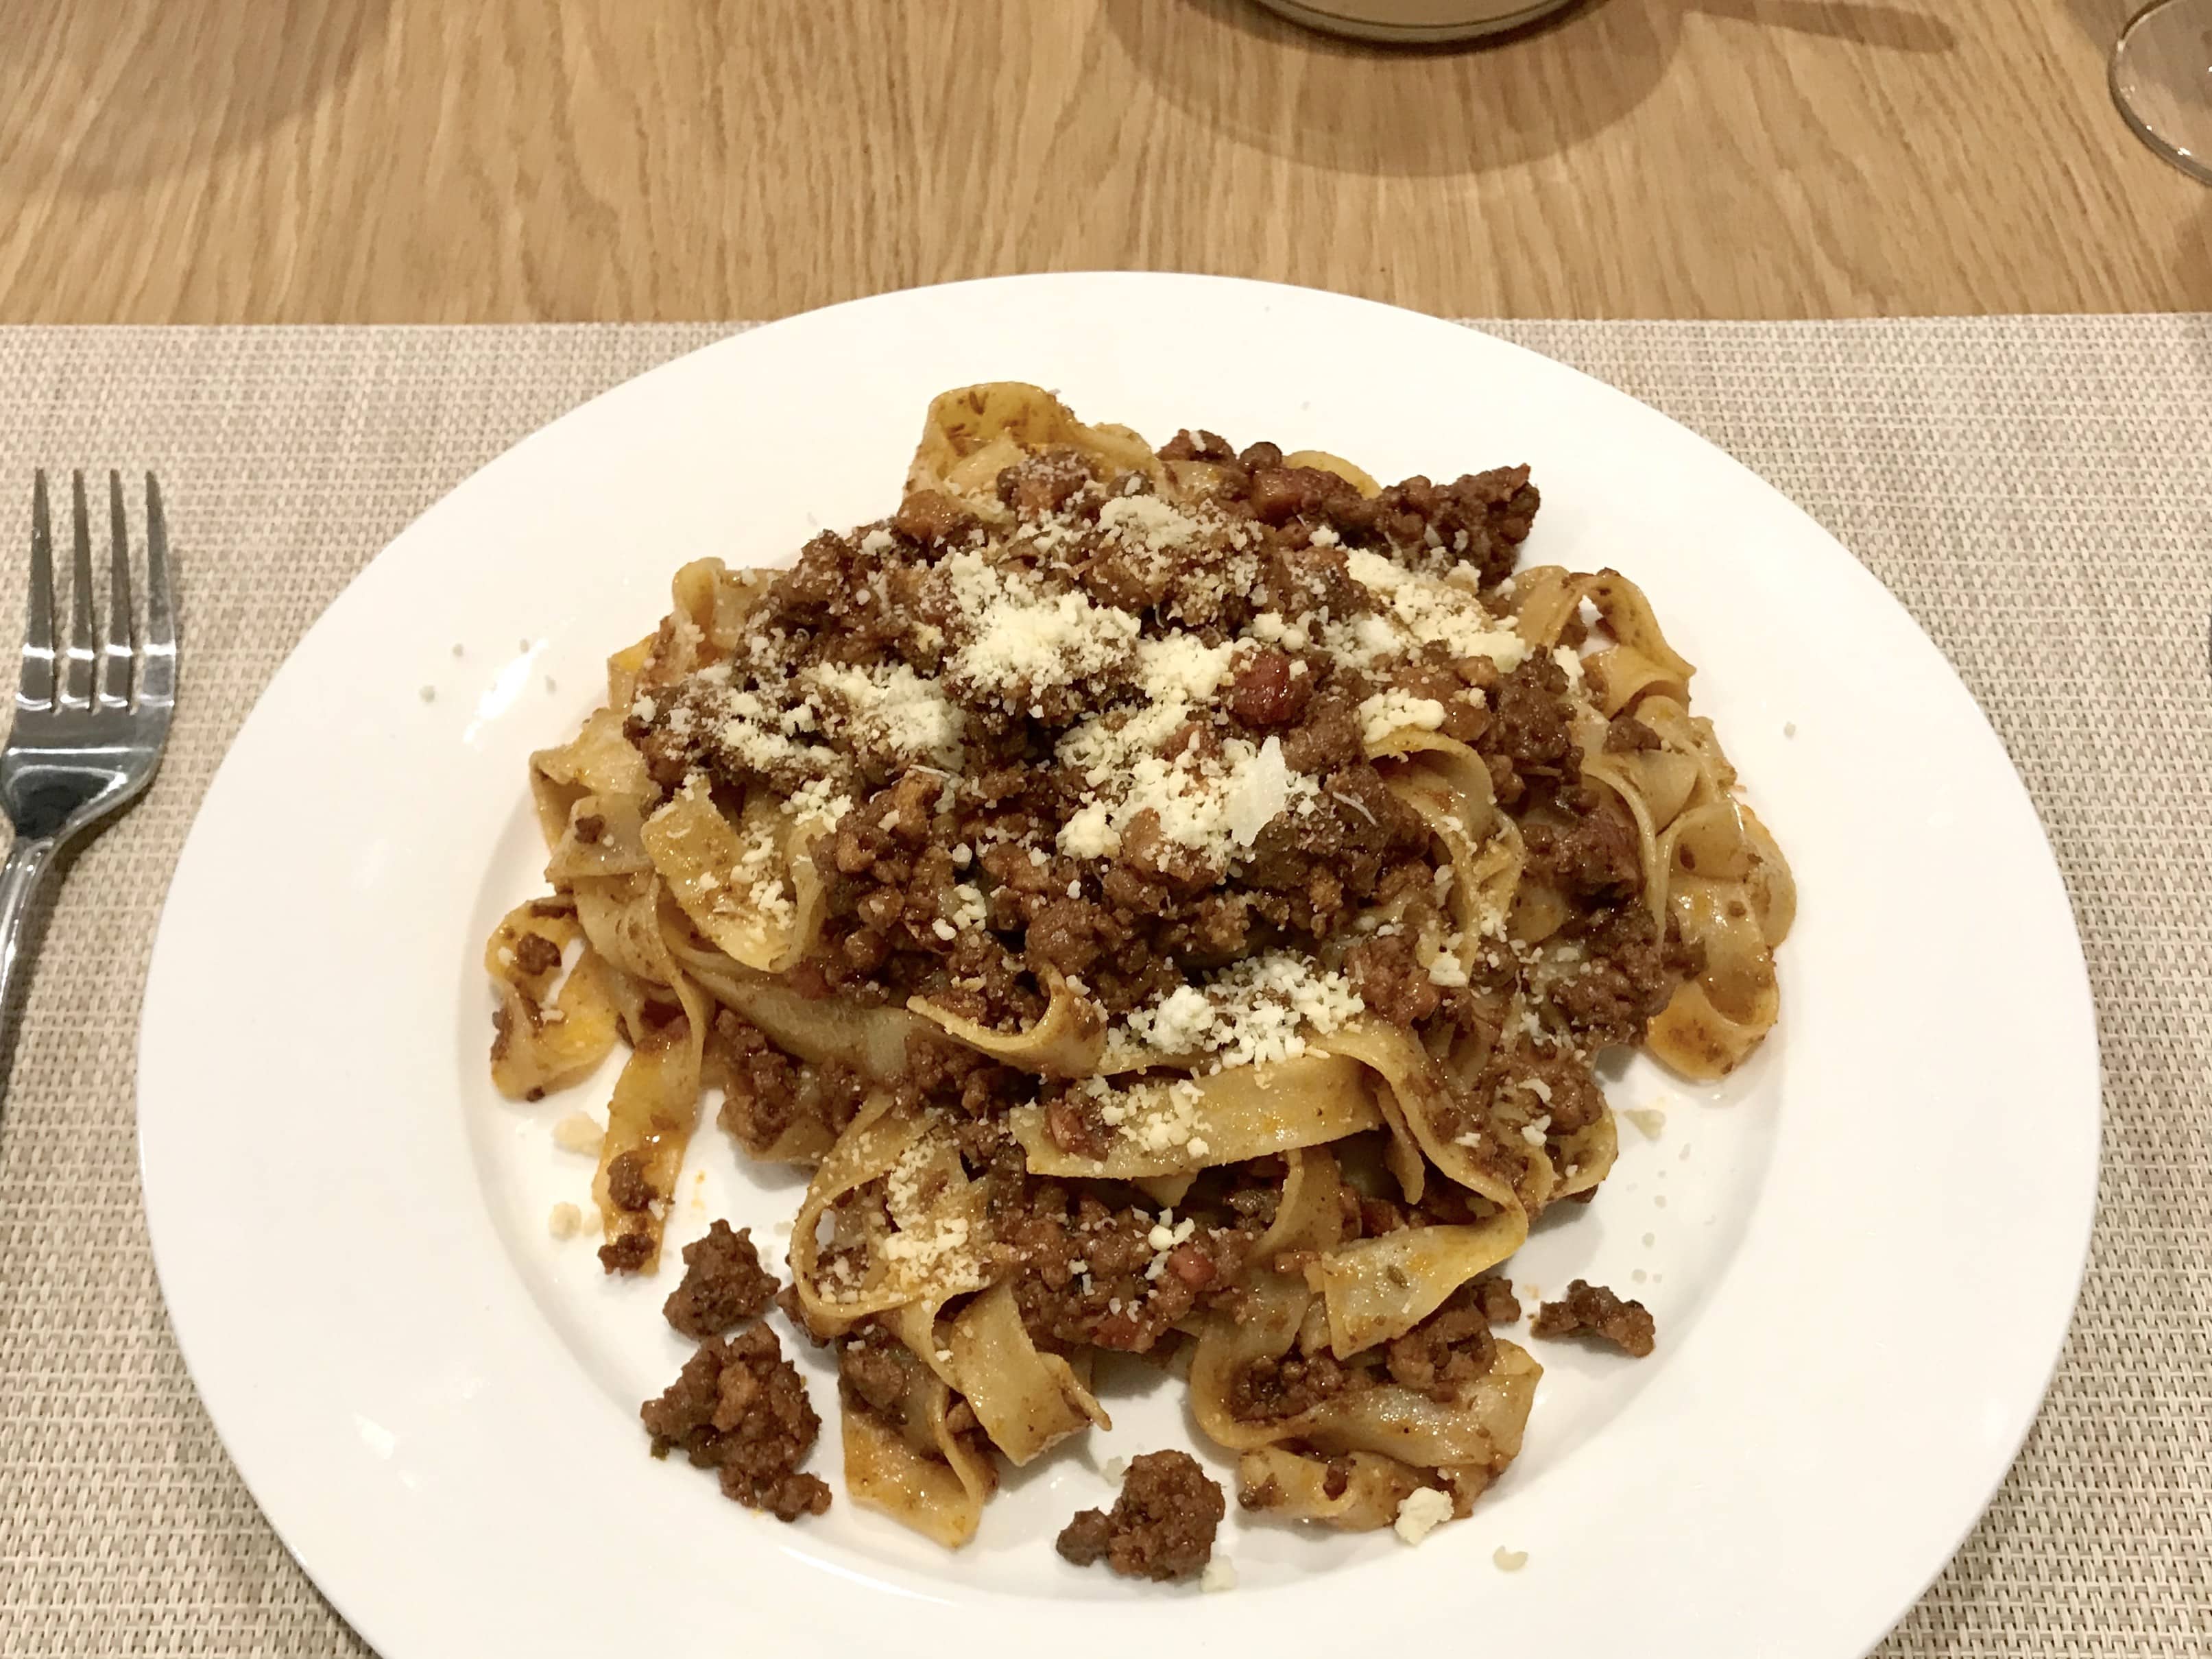 A white plate of spaghetti bolognese, placed on a natural coloured placemat on a brown table.